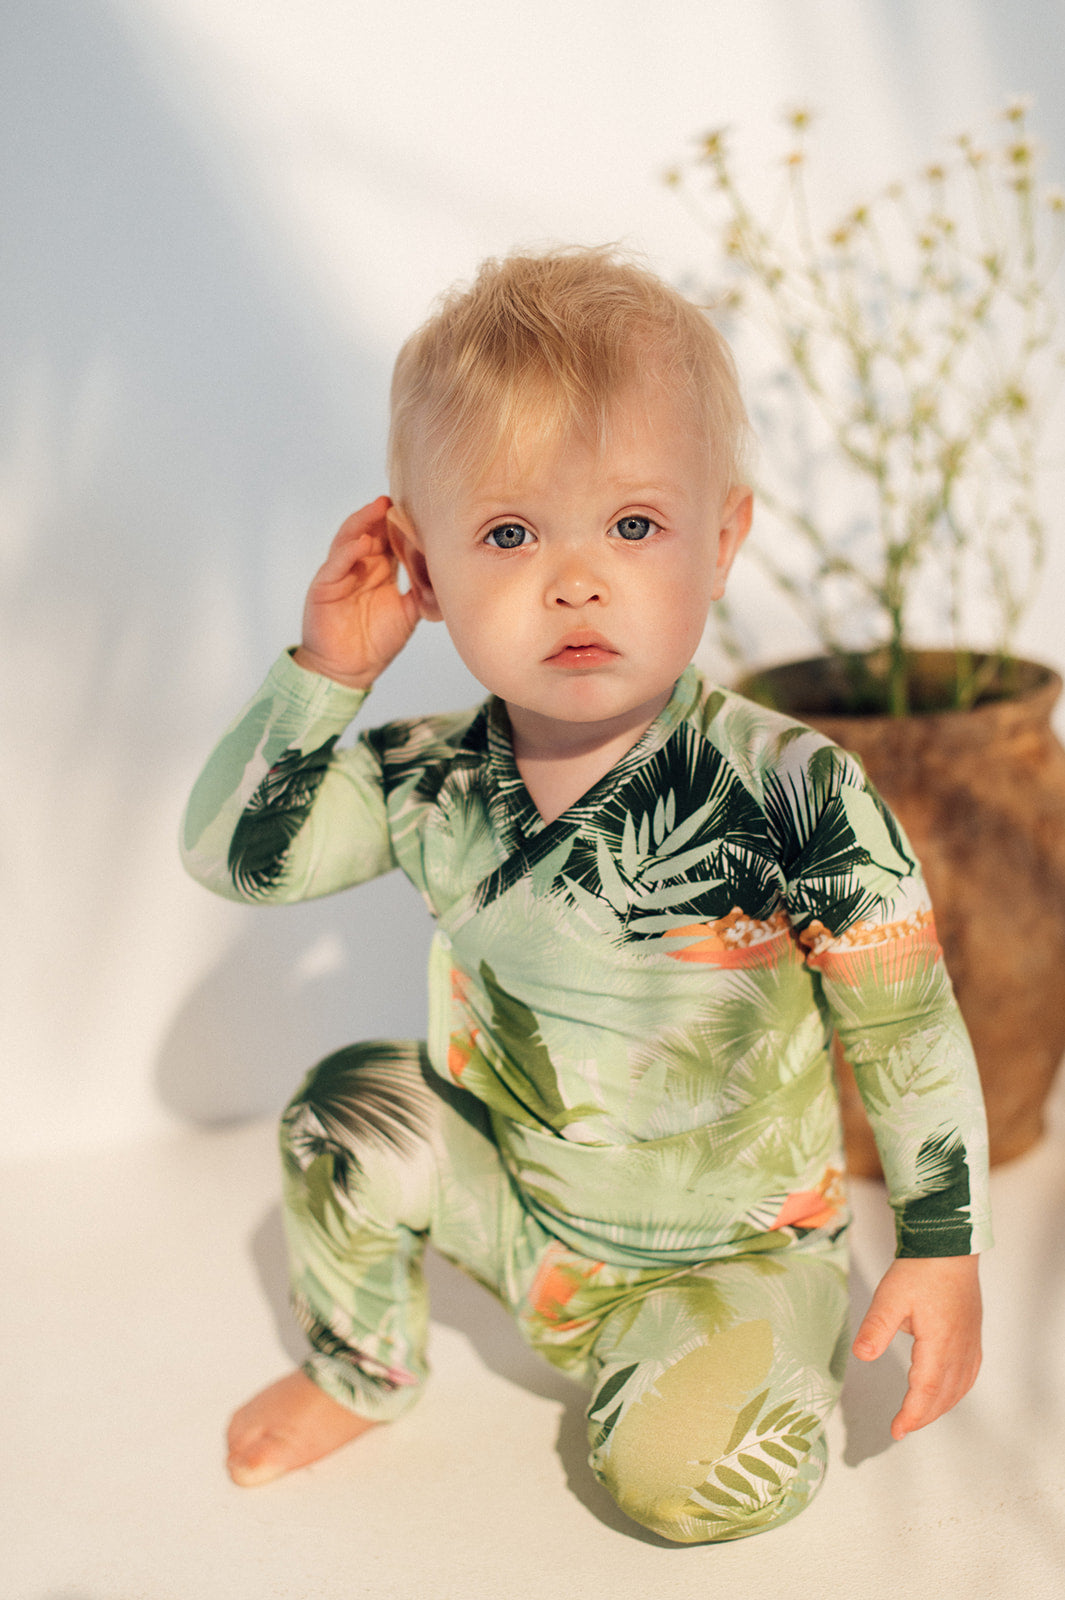 Tropical Green Baby Leggings - HURRY! Only 2 left